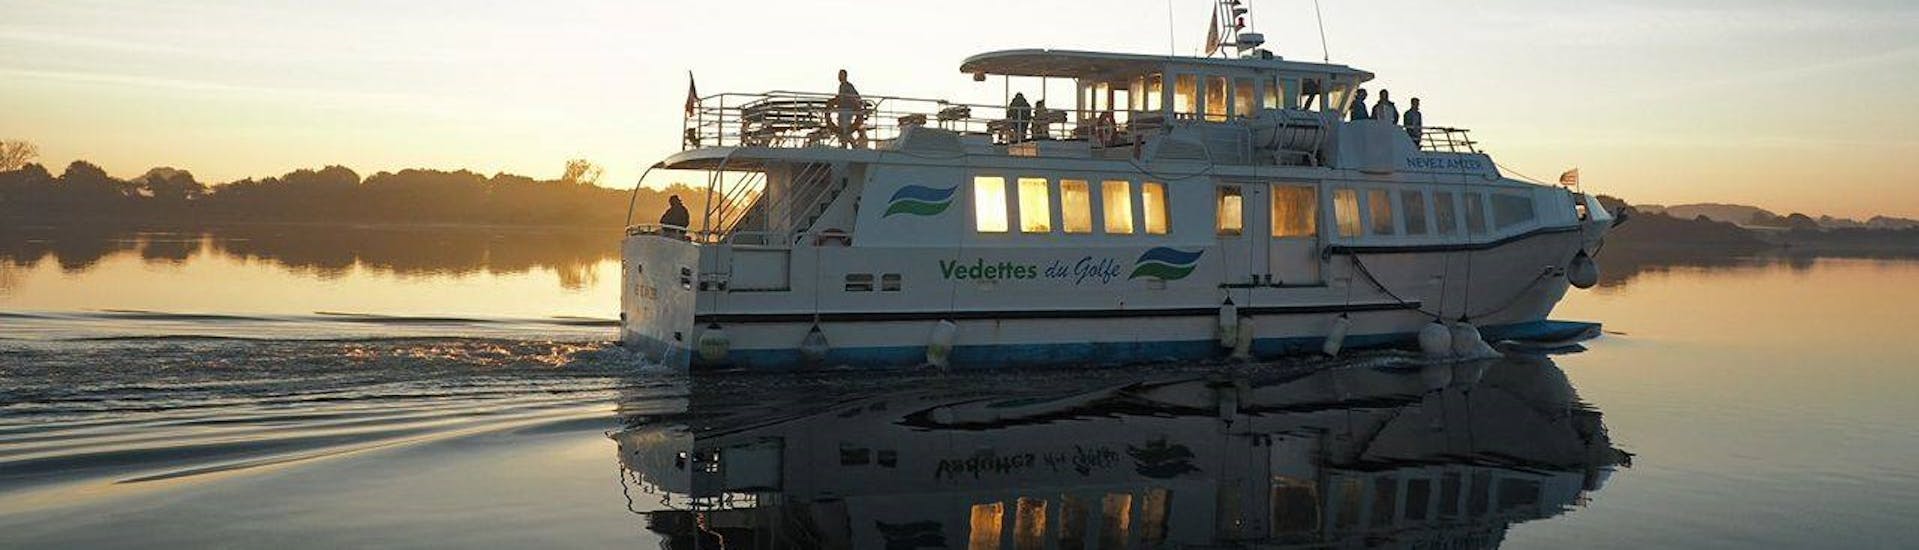 Boat of Vedettes du Golfe during the boat round-trip from Vannes with stopover in Houat and Hoëdic with Vedettes du Golfe.